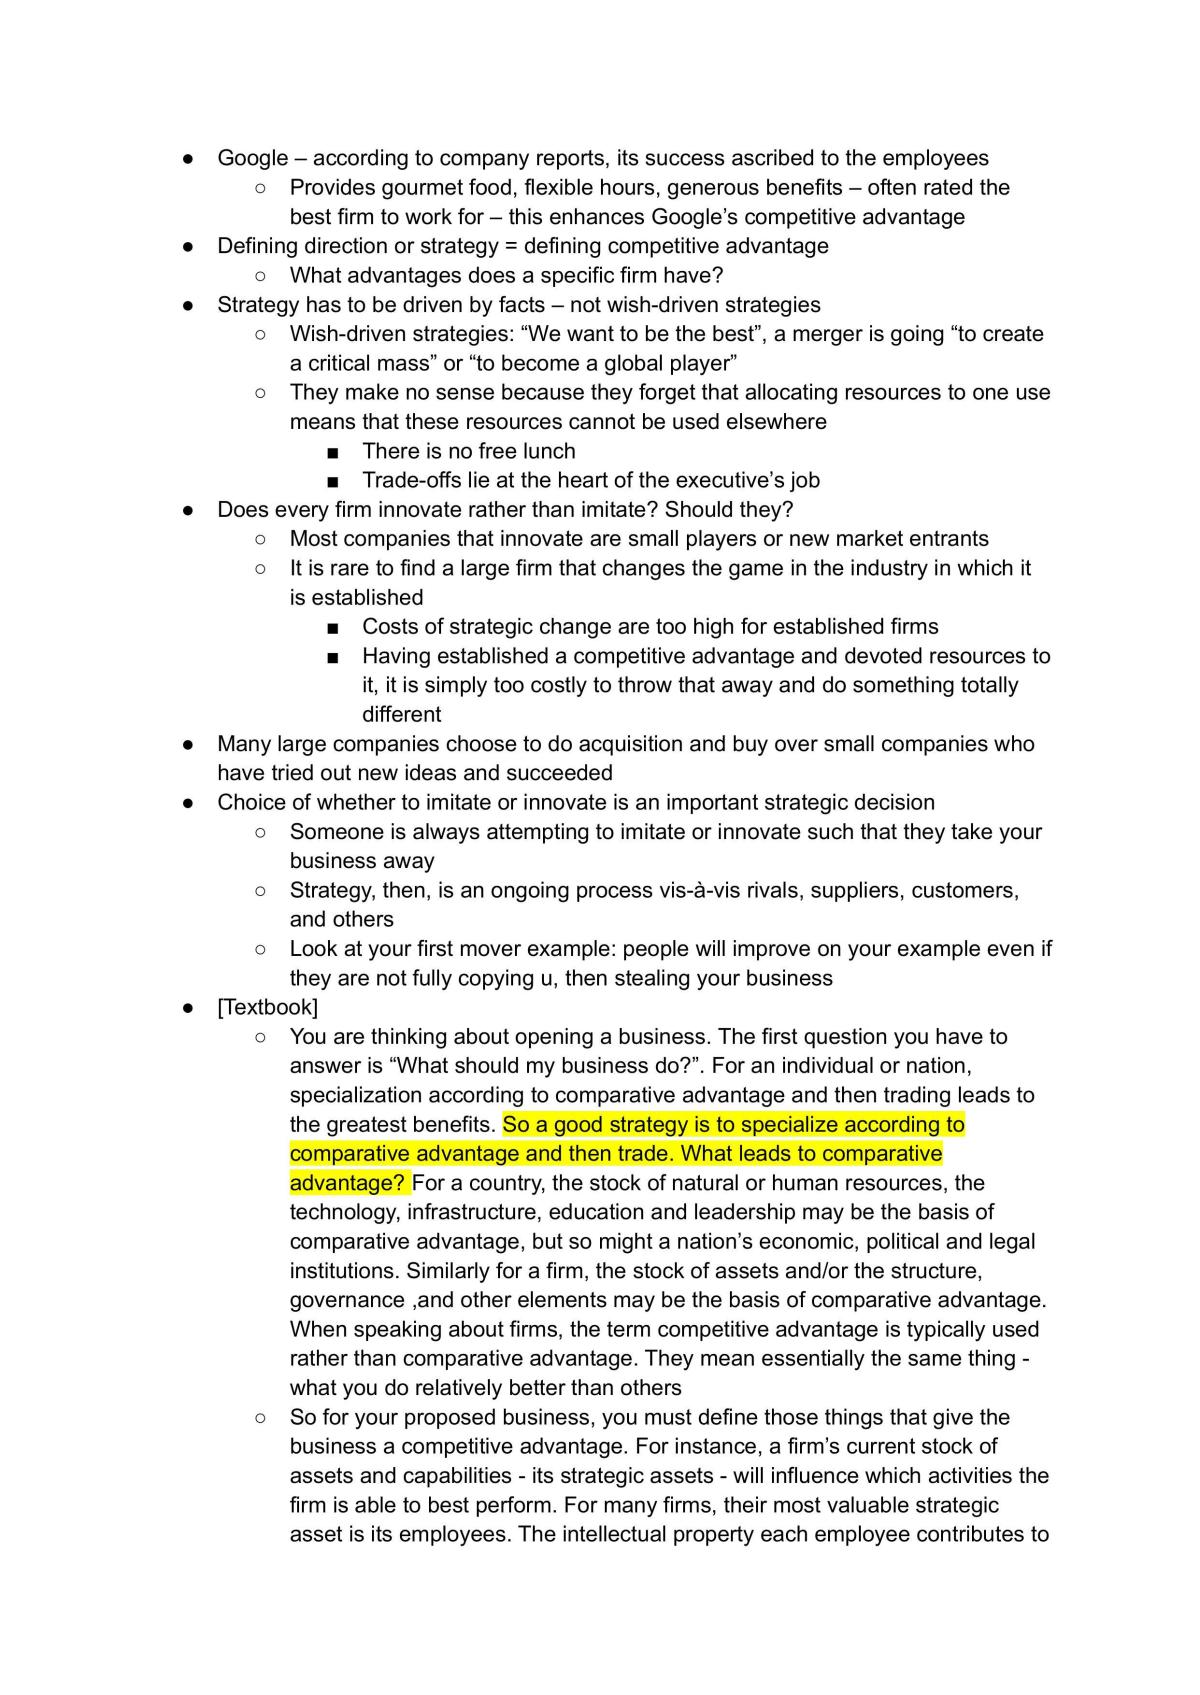 EC2205 Complete Notes - Page 67